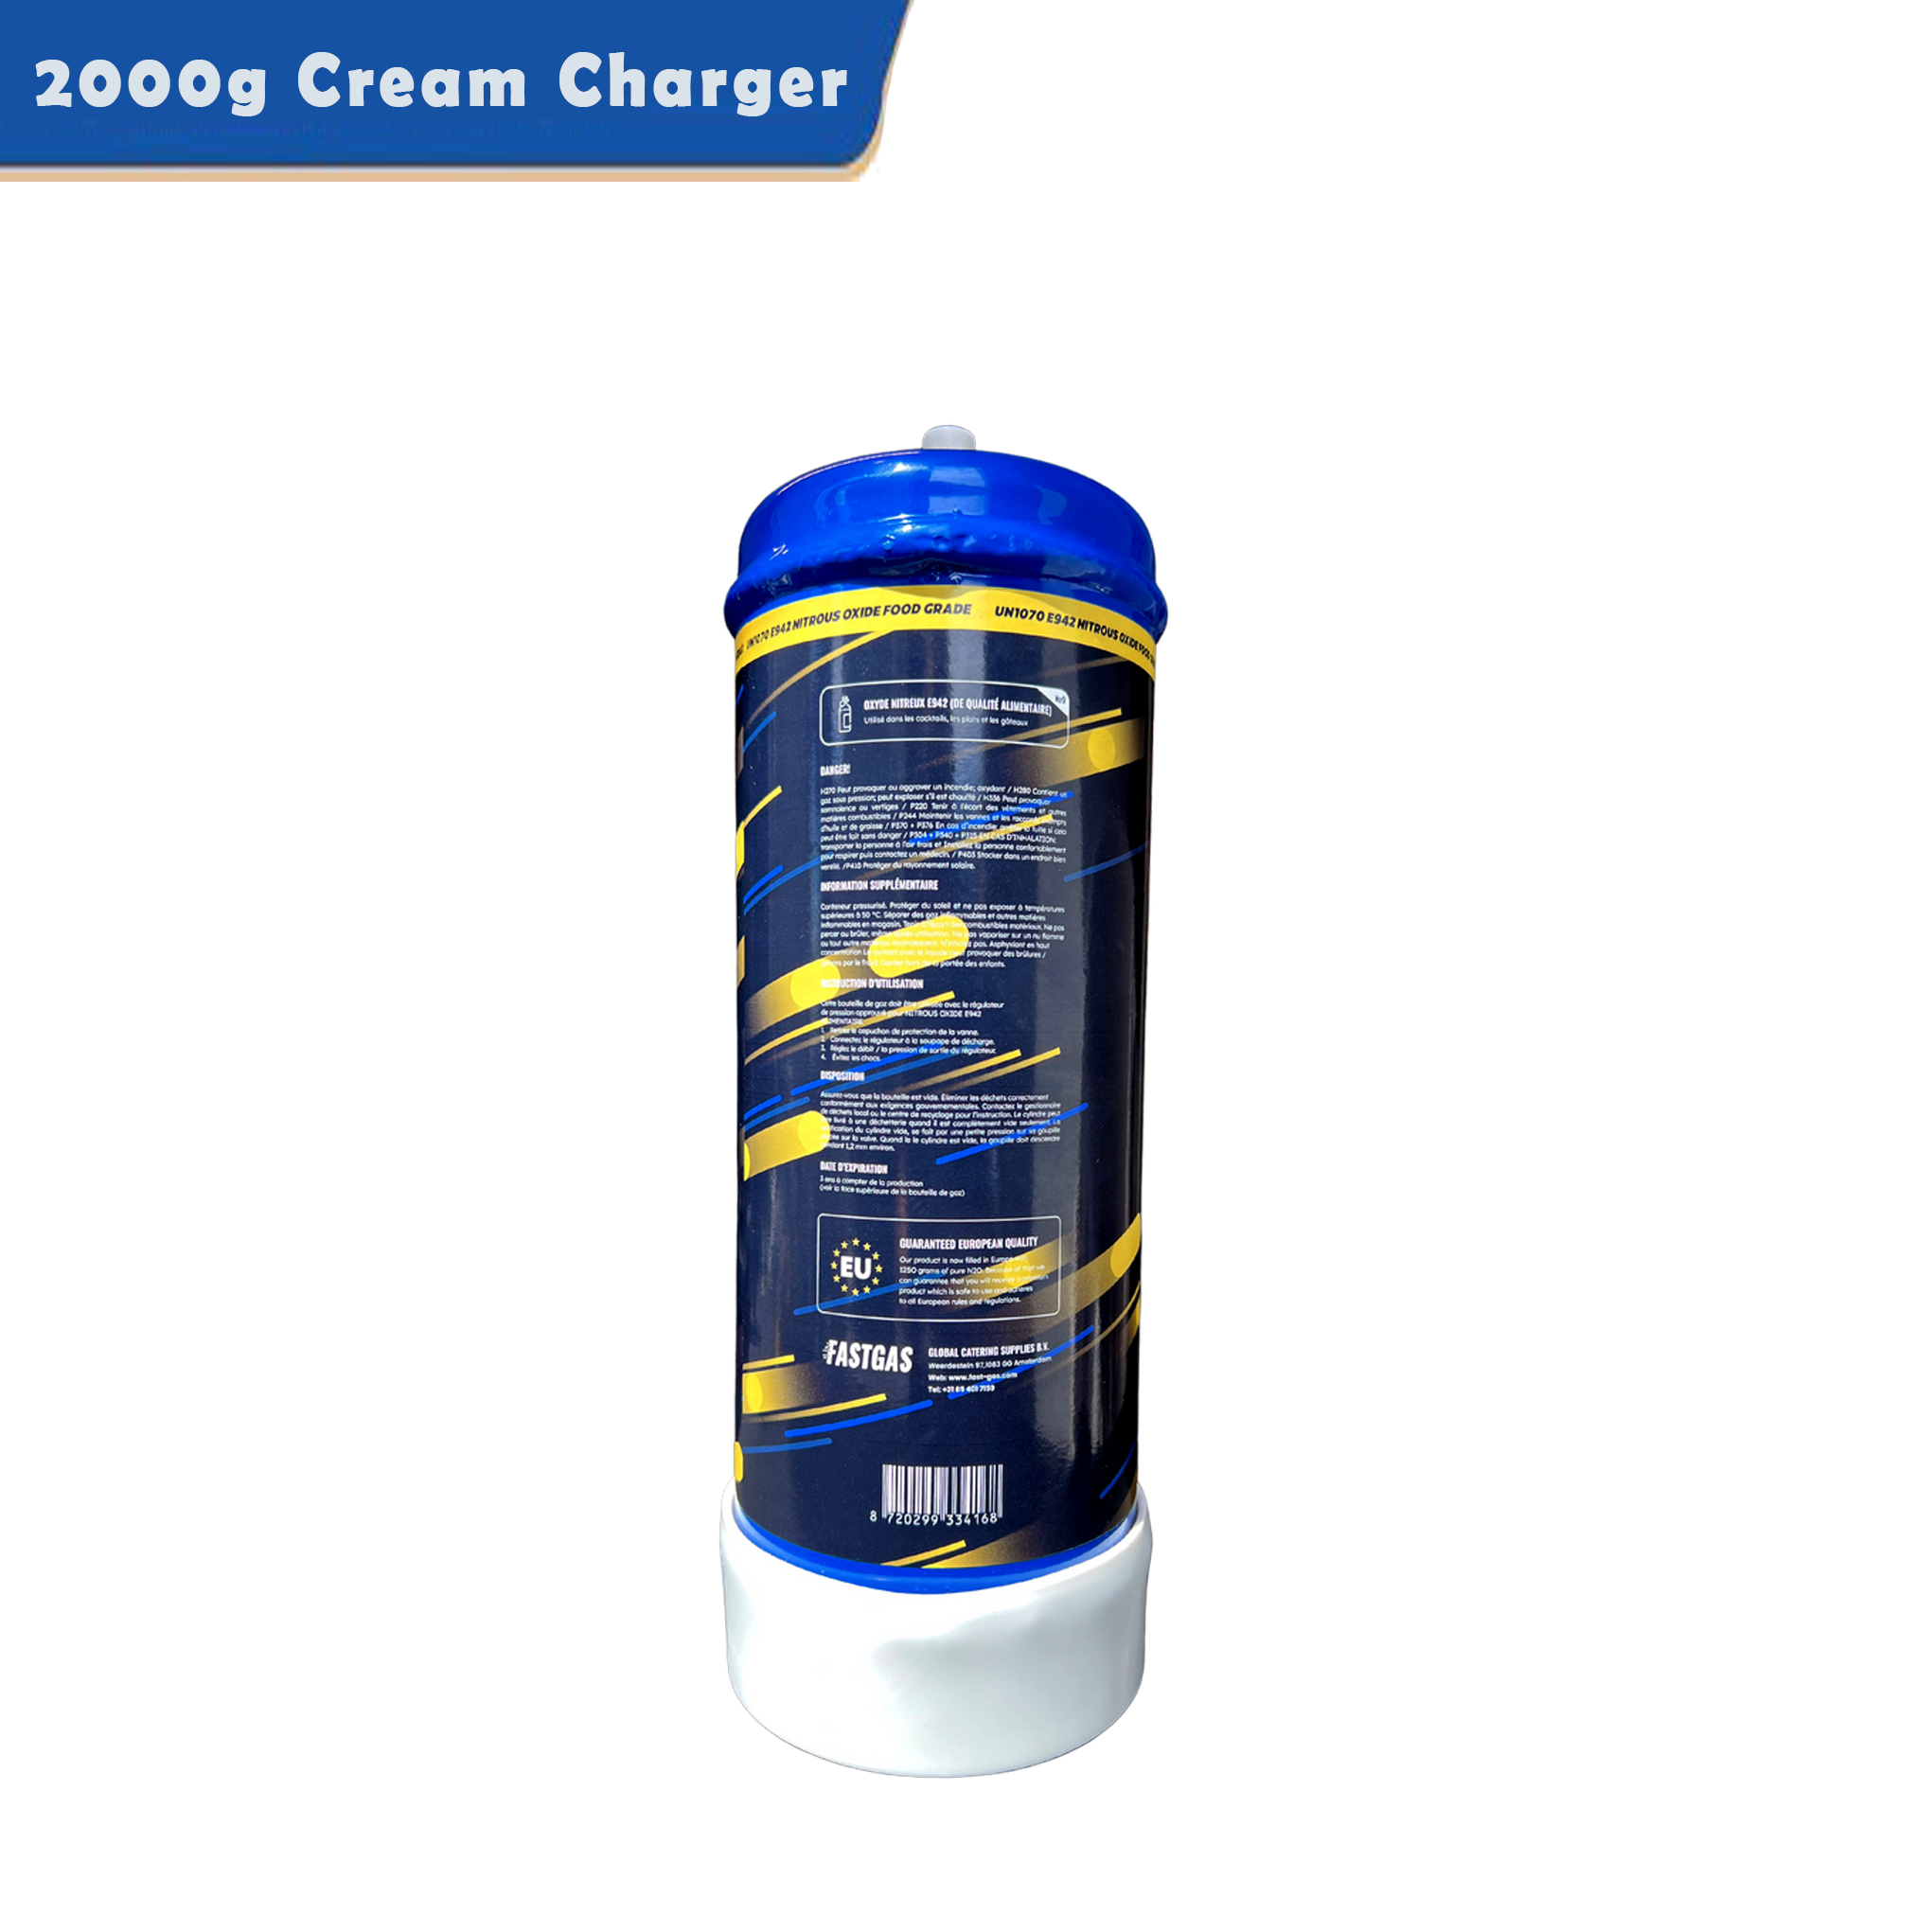 FastGas 3.3L N2O Canister 2000g Cream Charger Tank Wholesale - Free OEM